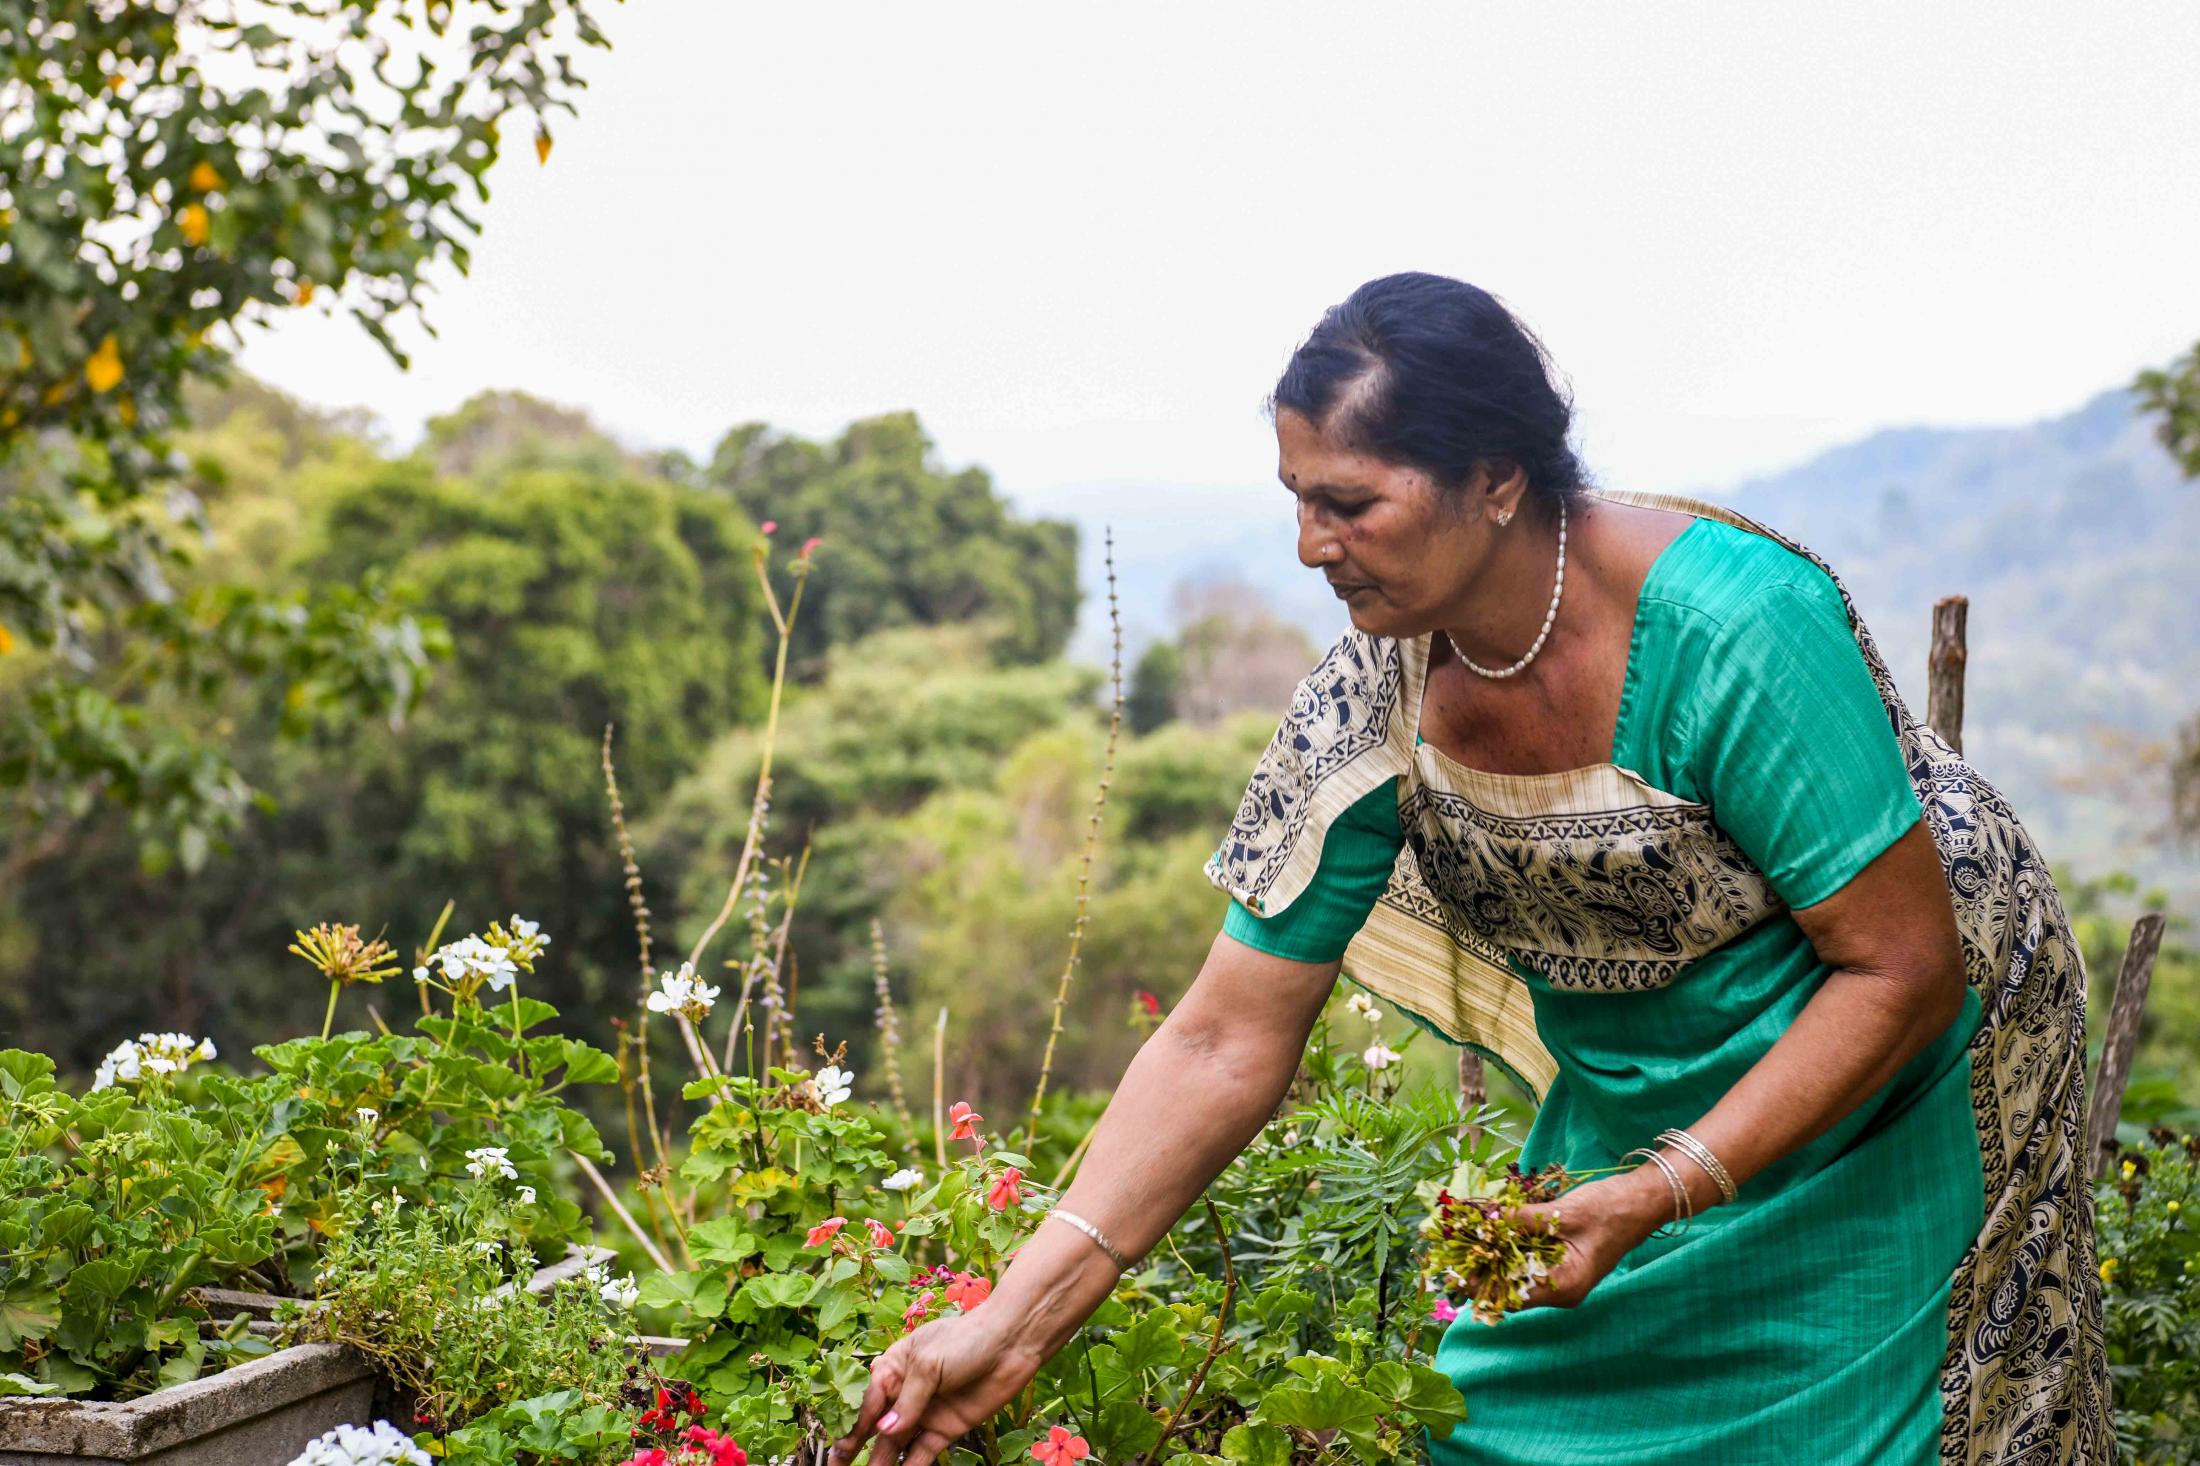 Thammaiah&rsquo;s mother tends to her garden every day. She says it isn&rsquo;t enough if you just harvest bees and have a coffee estate, it is very important to understand what kind of flowers and fruits attract them and cultivate them in your garden. This helps in increasing pollination and nectar production.